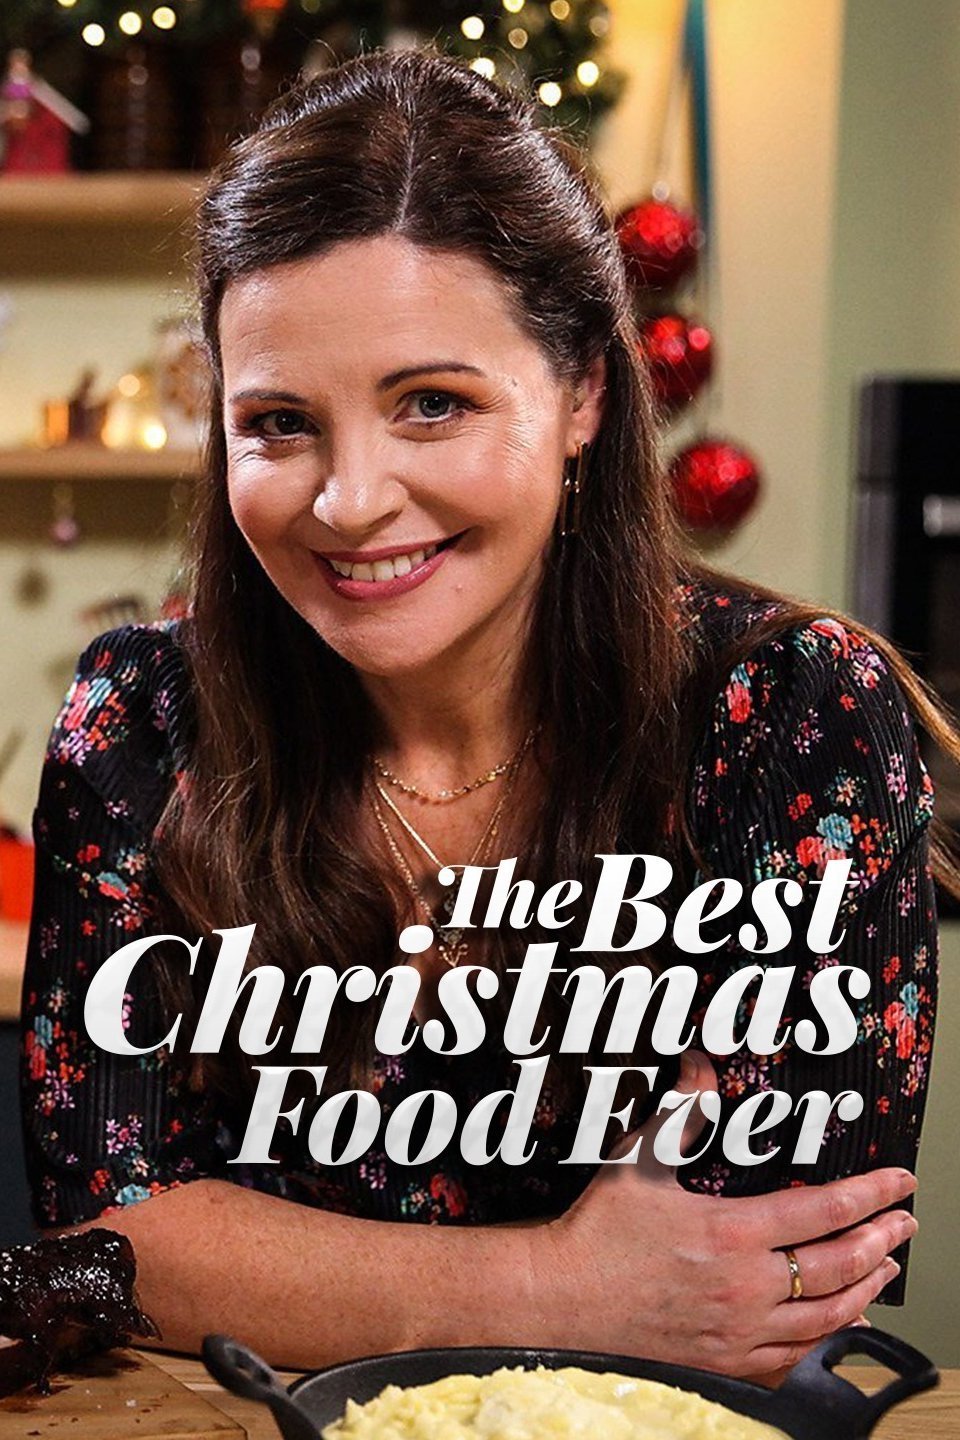 The Best Christmas Food Ever - Rotten Tomatoes